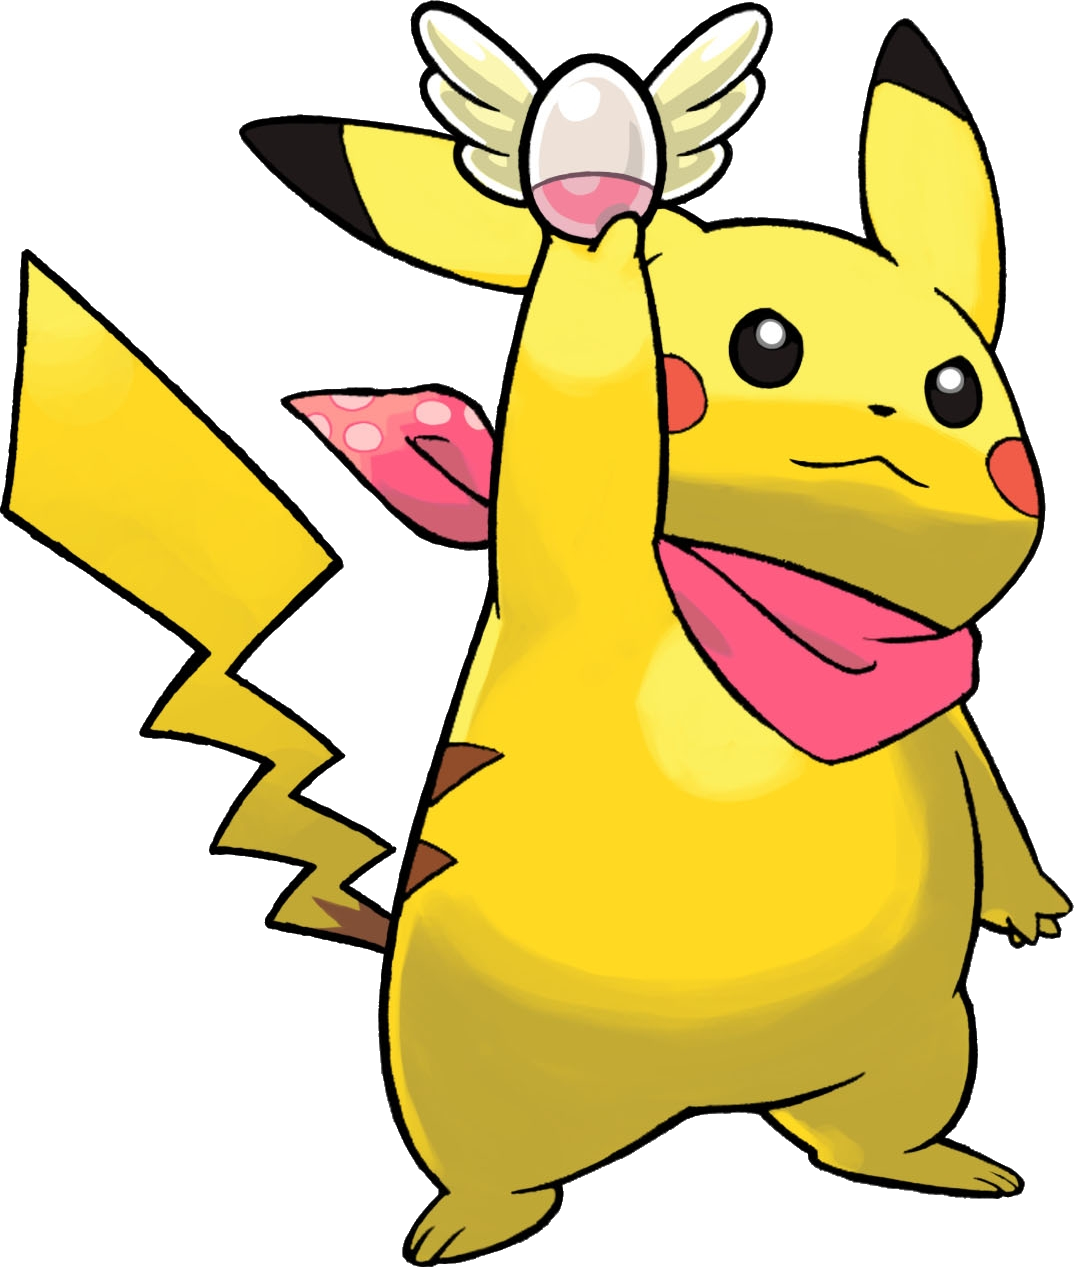 18awesome Yellow Colored Pokemon More Image Ideas - Pokemon Mystery Dungeon Red Rescue Team Pikachu (1074x1267)